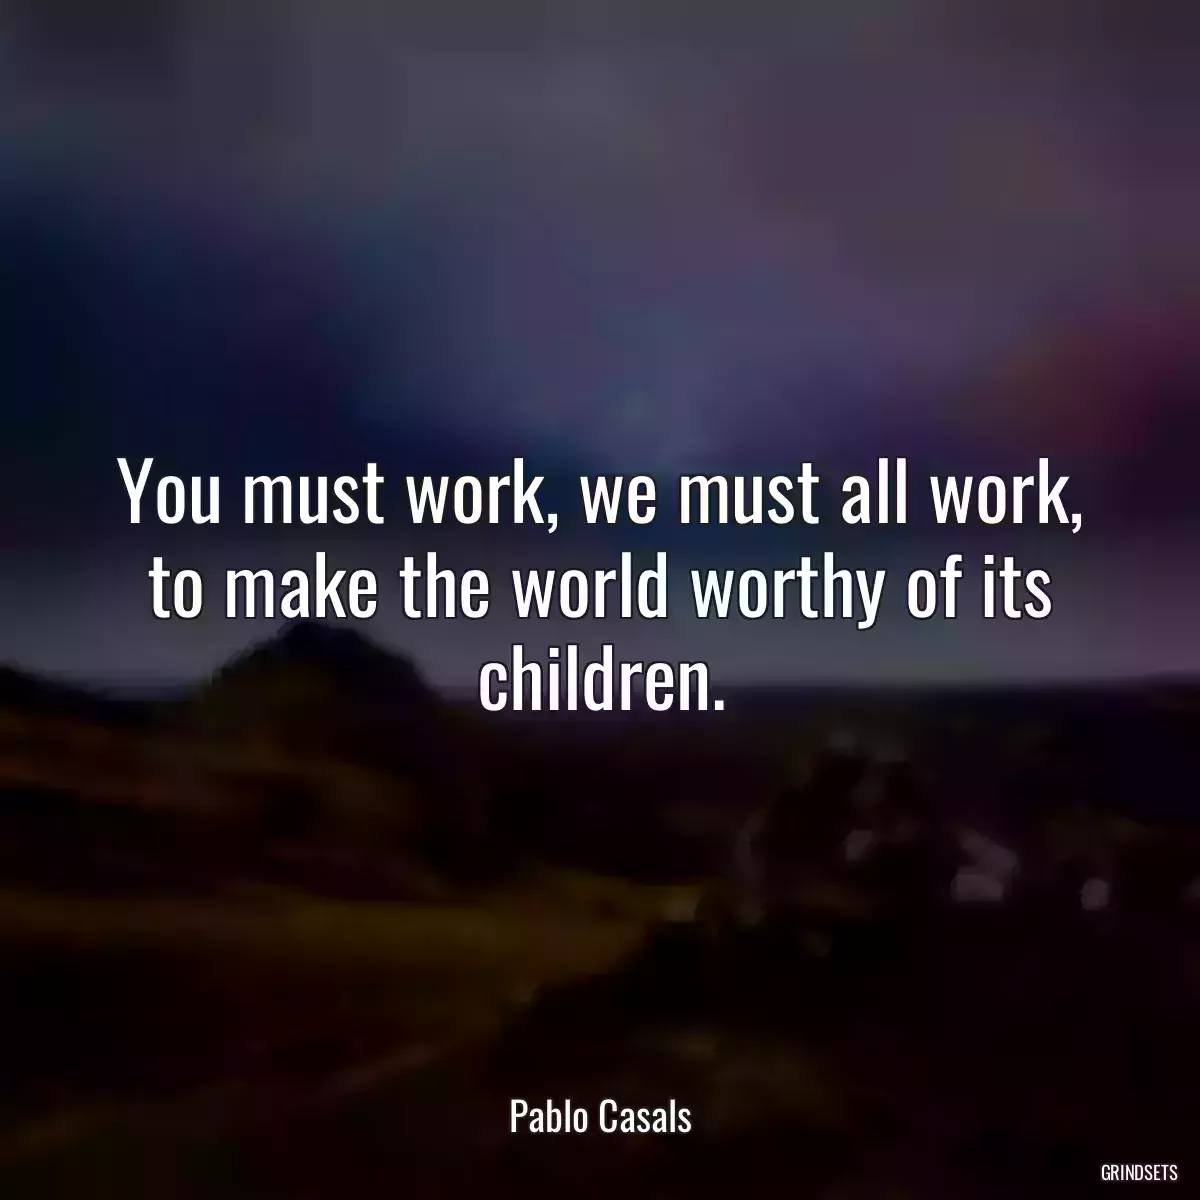 You must work, we must all work, to make the world worthy of its children.